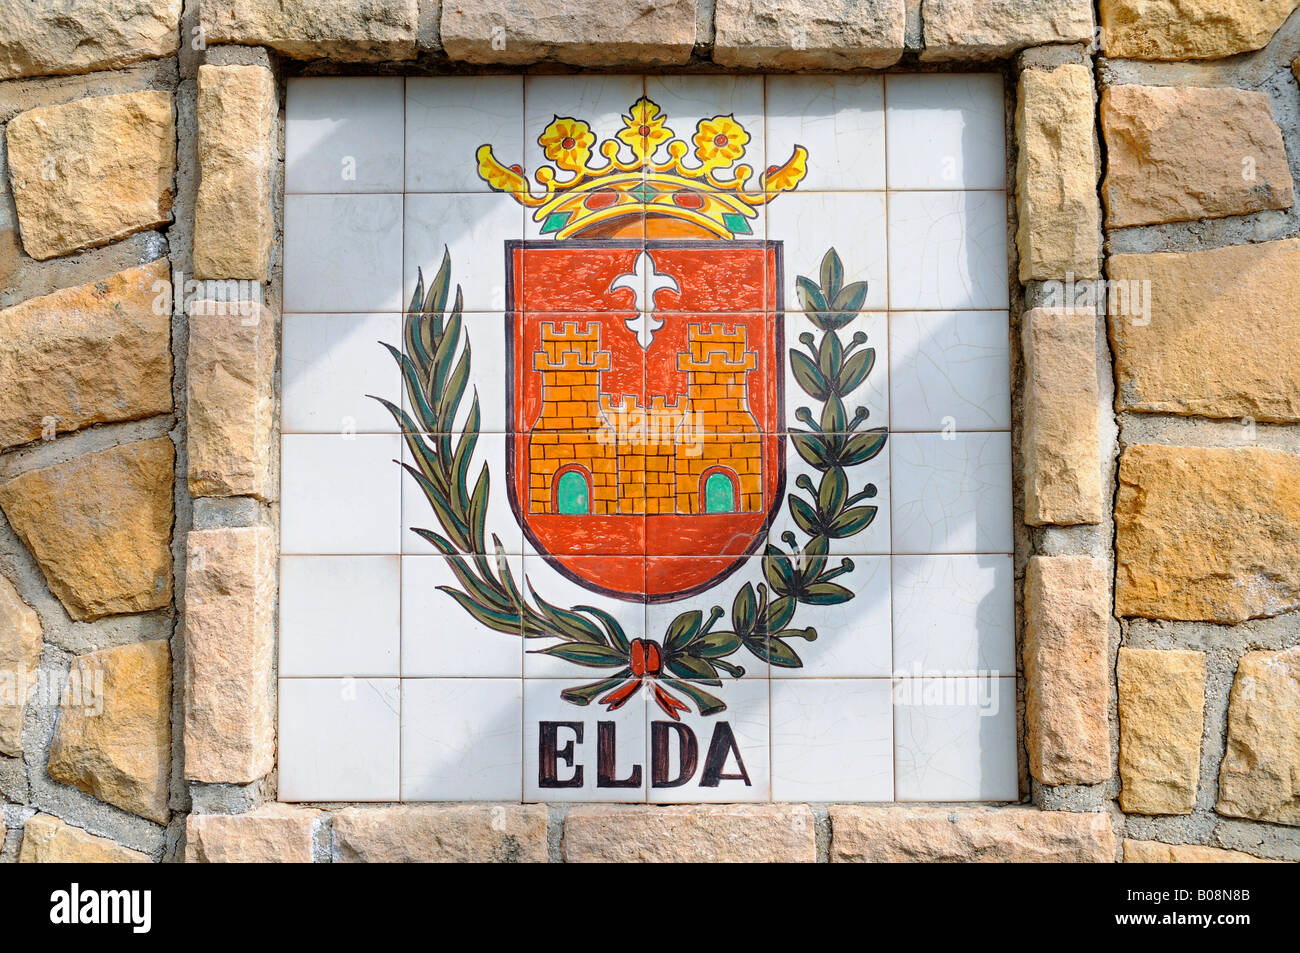 Town coat of arms for Elda painted on tiles, Elda, Polop, Alicante, Costa Blanca, Spain Stock Photo